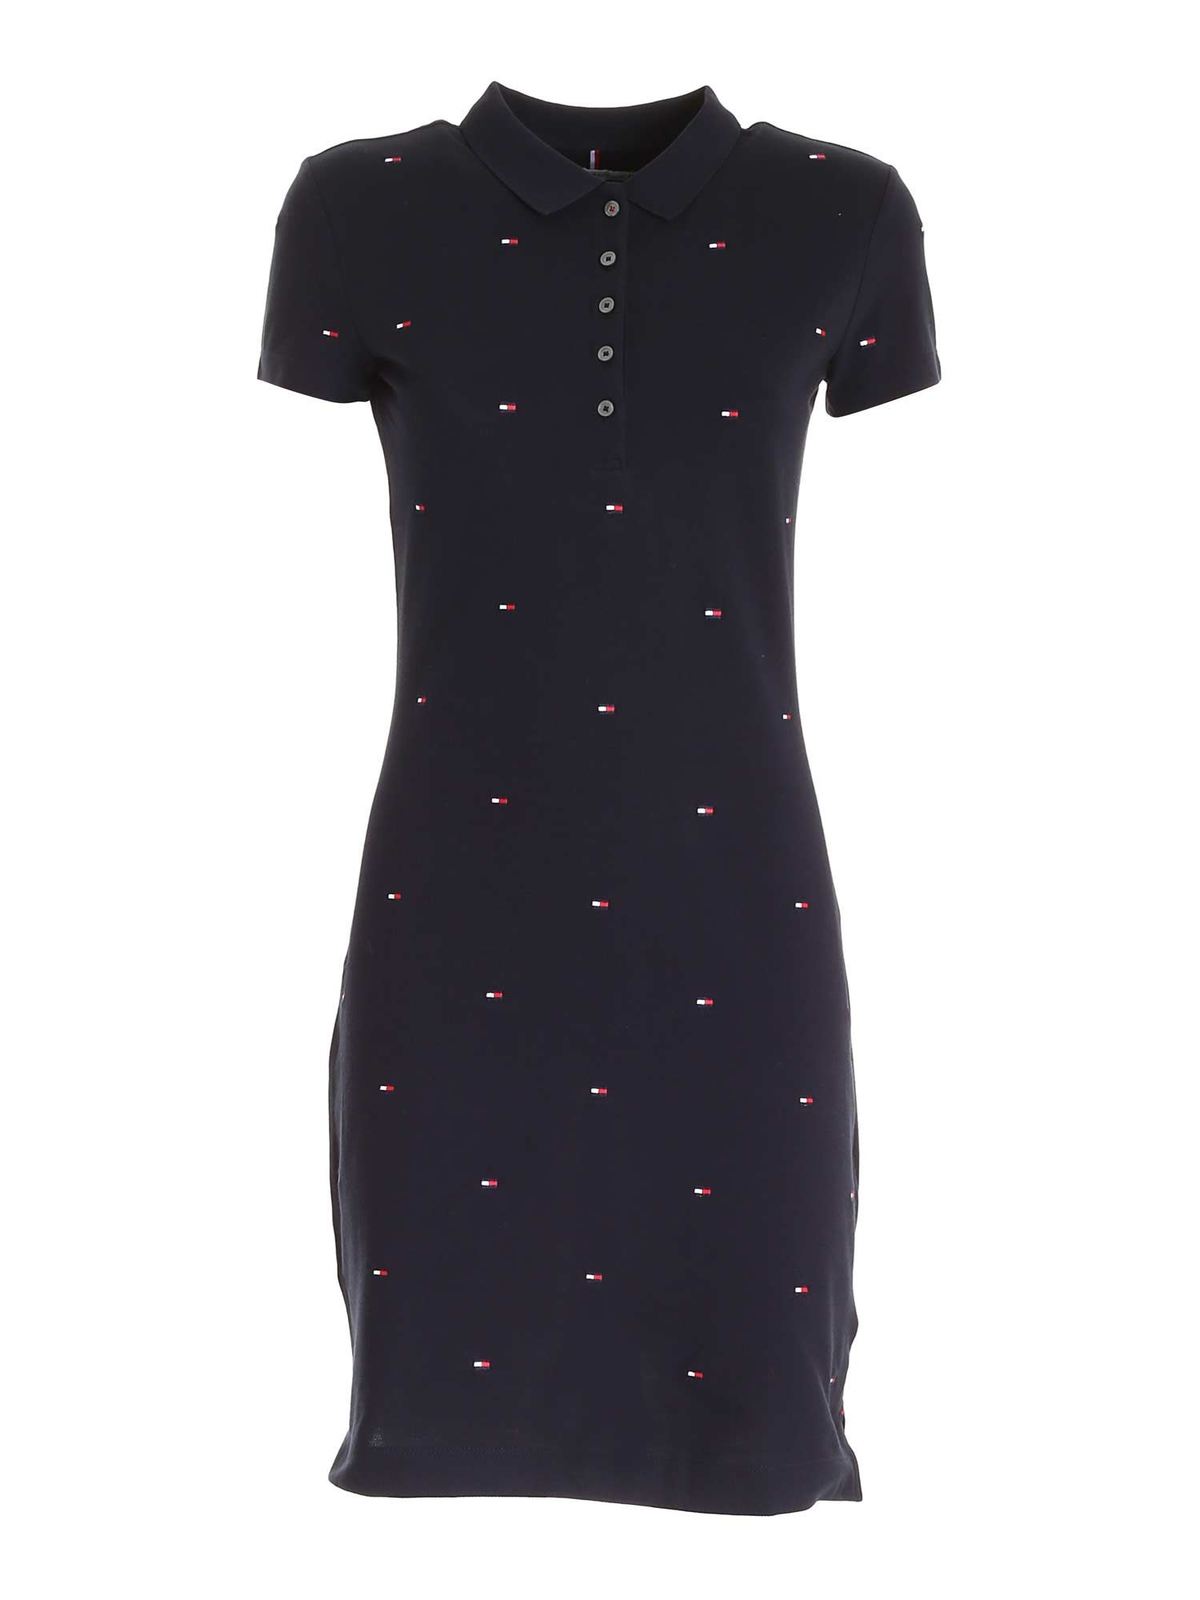 TOMMY HILFIGER LOGO EMBROIDERY DRESS IN BLUE